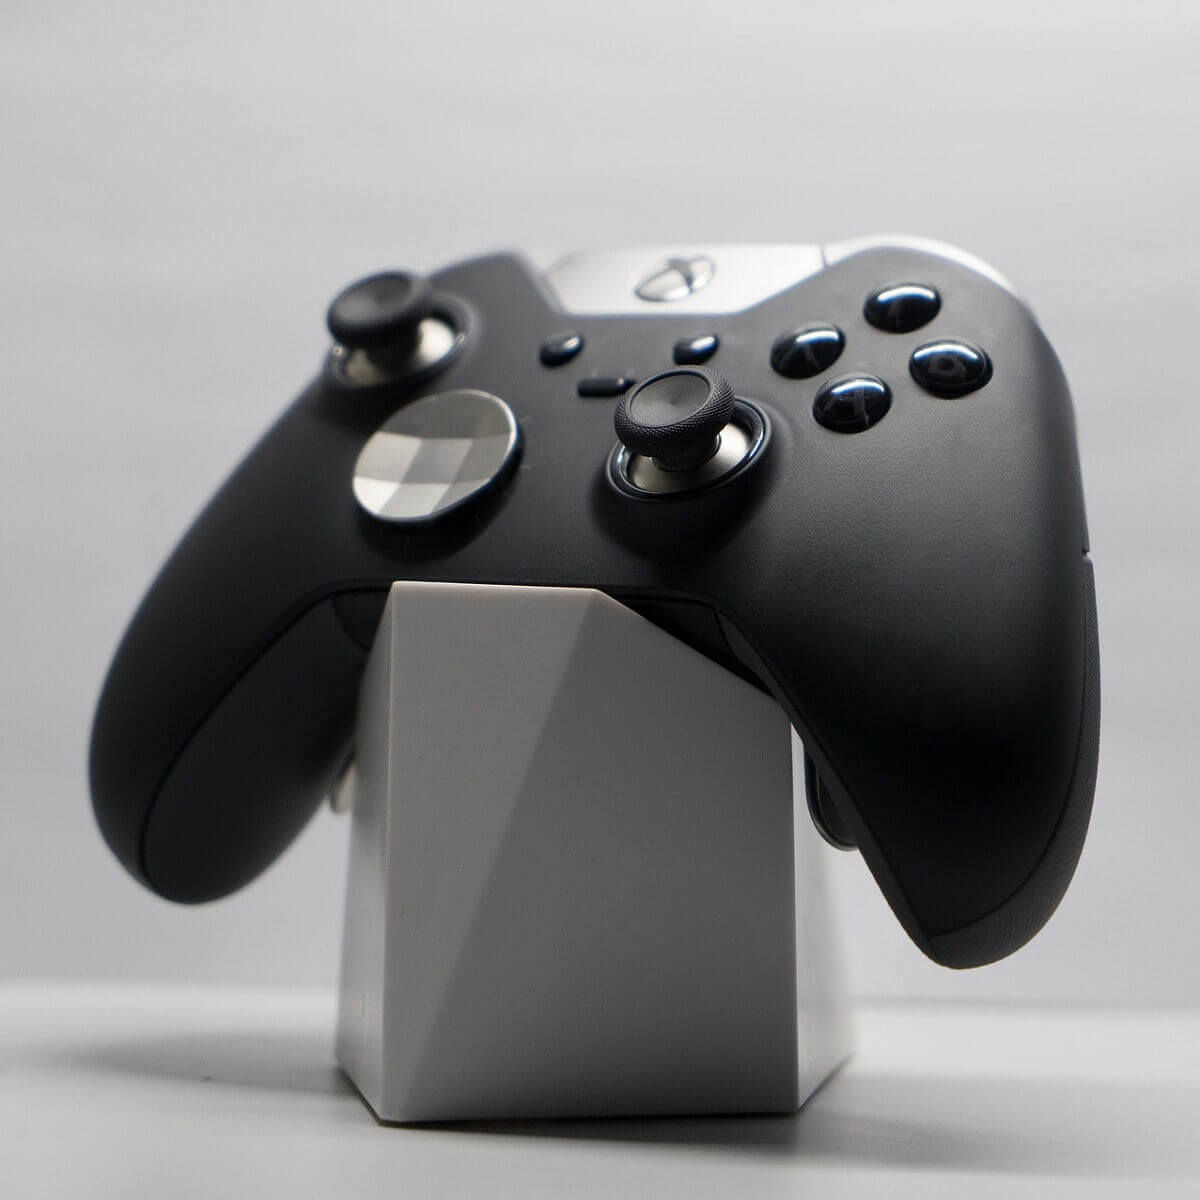 Fix Xbox One S Controller not connecting to Android